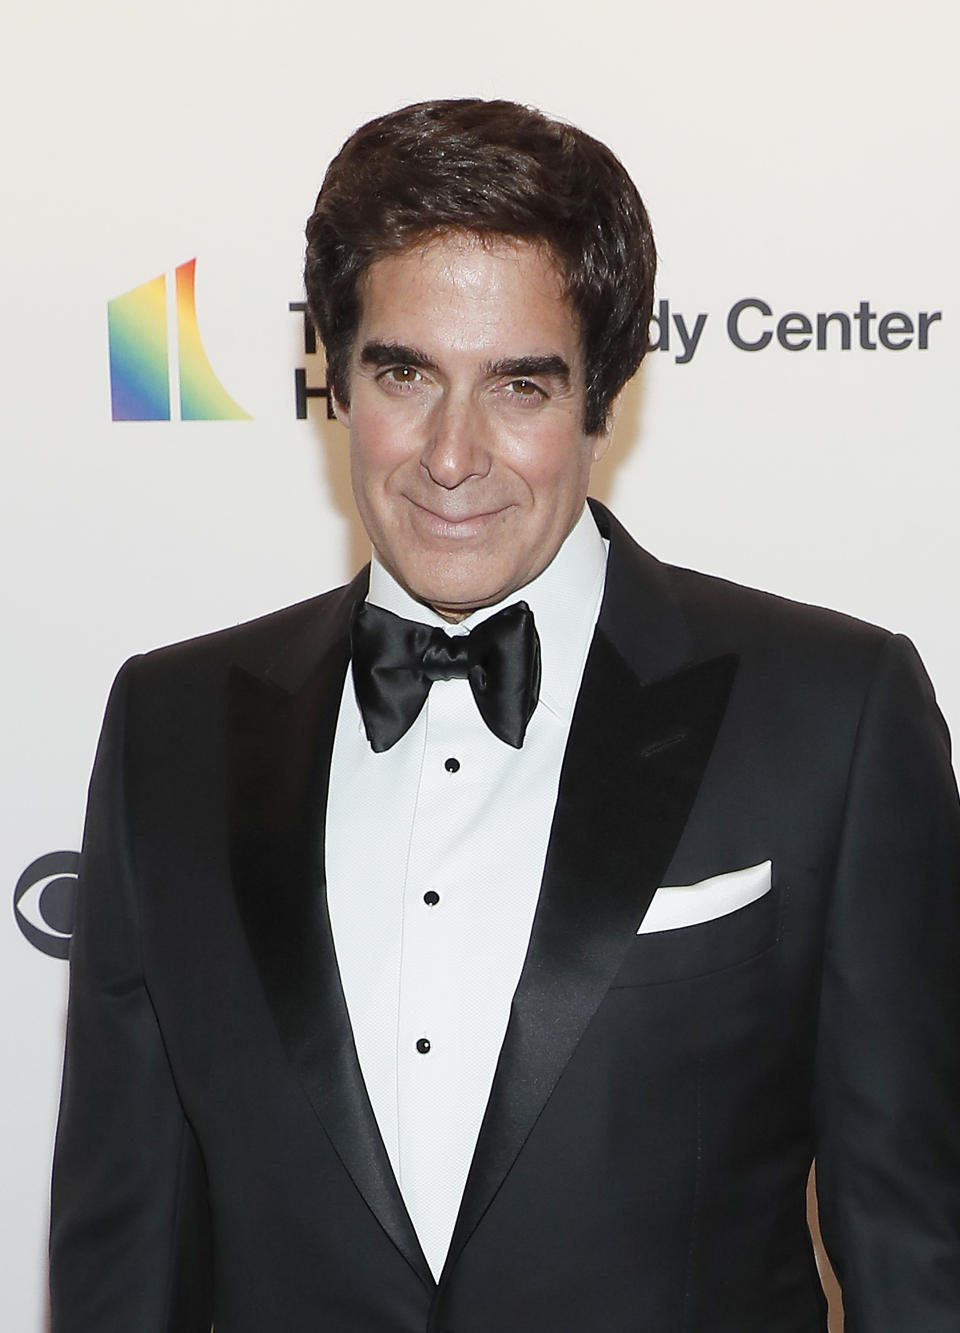 WASHINGTON, DC - DECEMBER 08: David Copperfield attends the 42nd Annual Kennedy Center Honors at Kennedy Center Hall of States on December 08, 2019 in Washington, DC. (Photo by Paul Morigi/Getty Images)